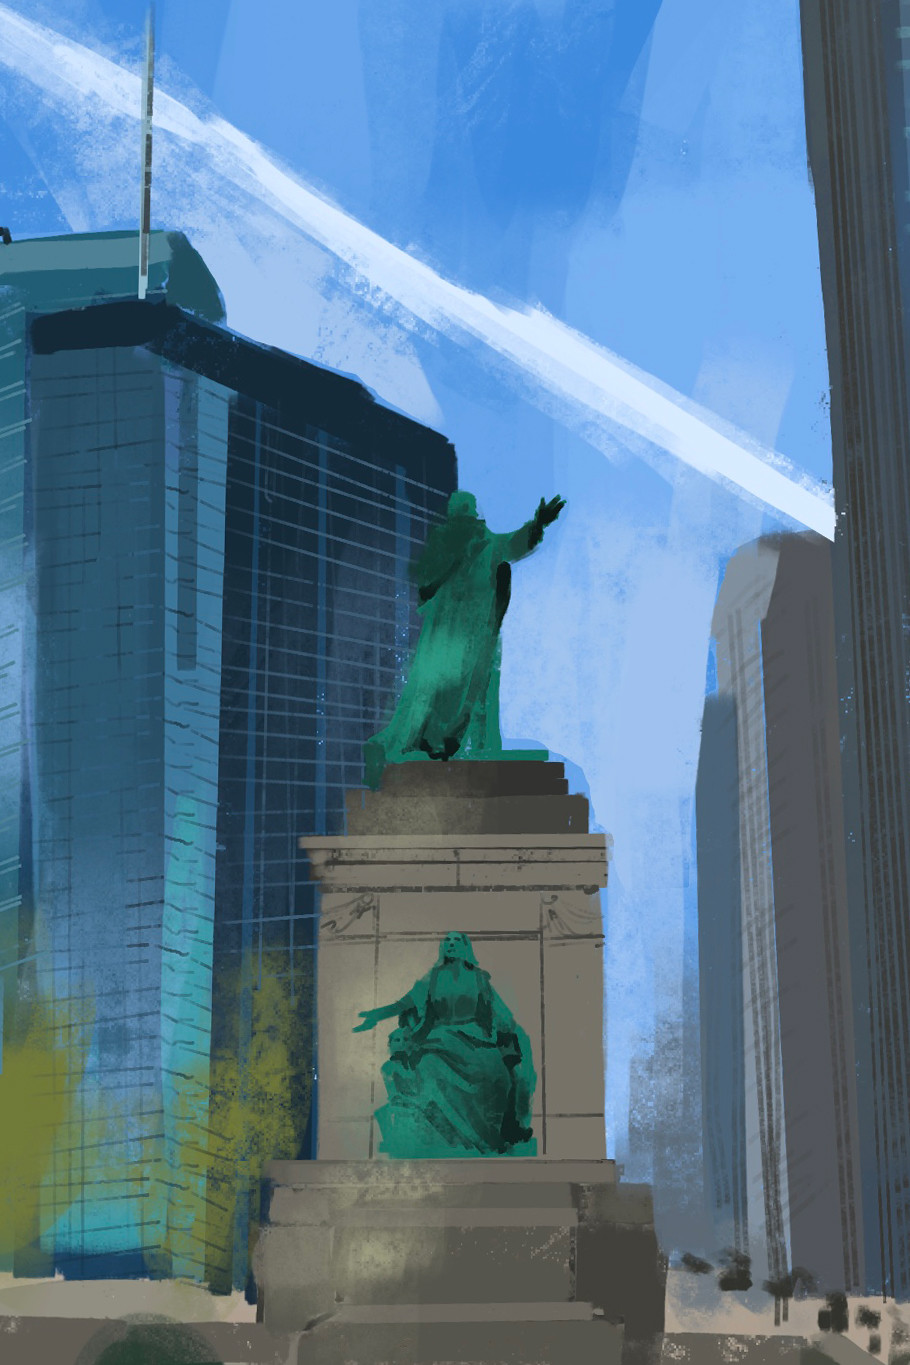 A messy digital painting of two turquoise sculptures of religious figures, gesturing with their hands outstretched on a pillar outdoors. In the background are tall glassy buildings on a bright blue sky. The brush strokes are messy and edges are generally uneven.